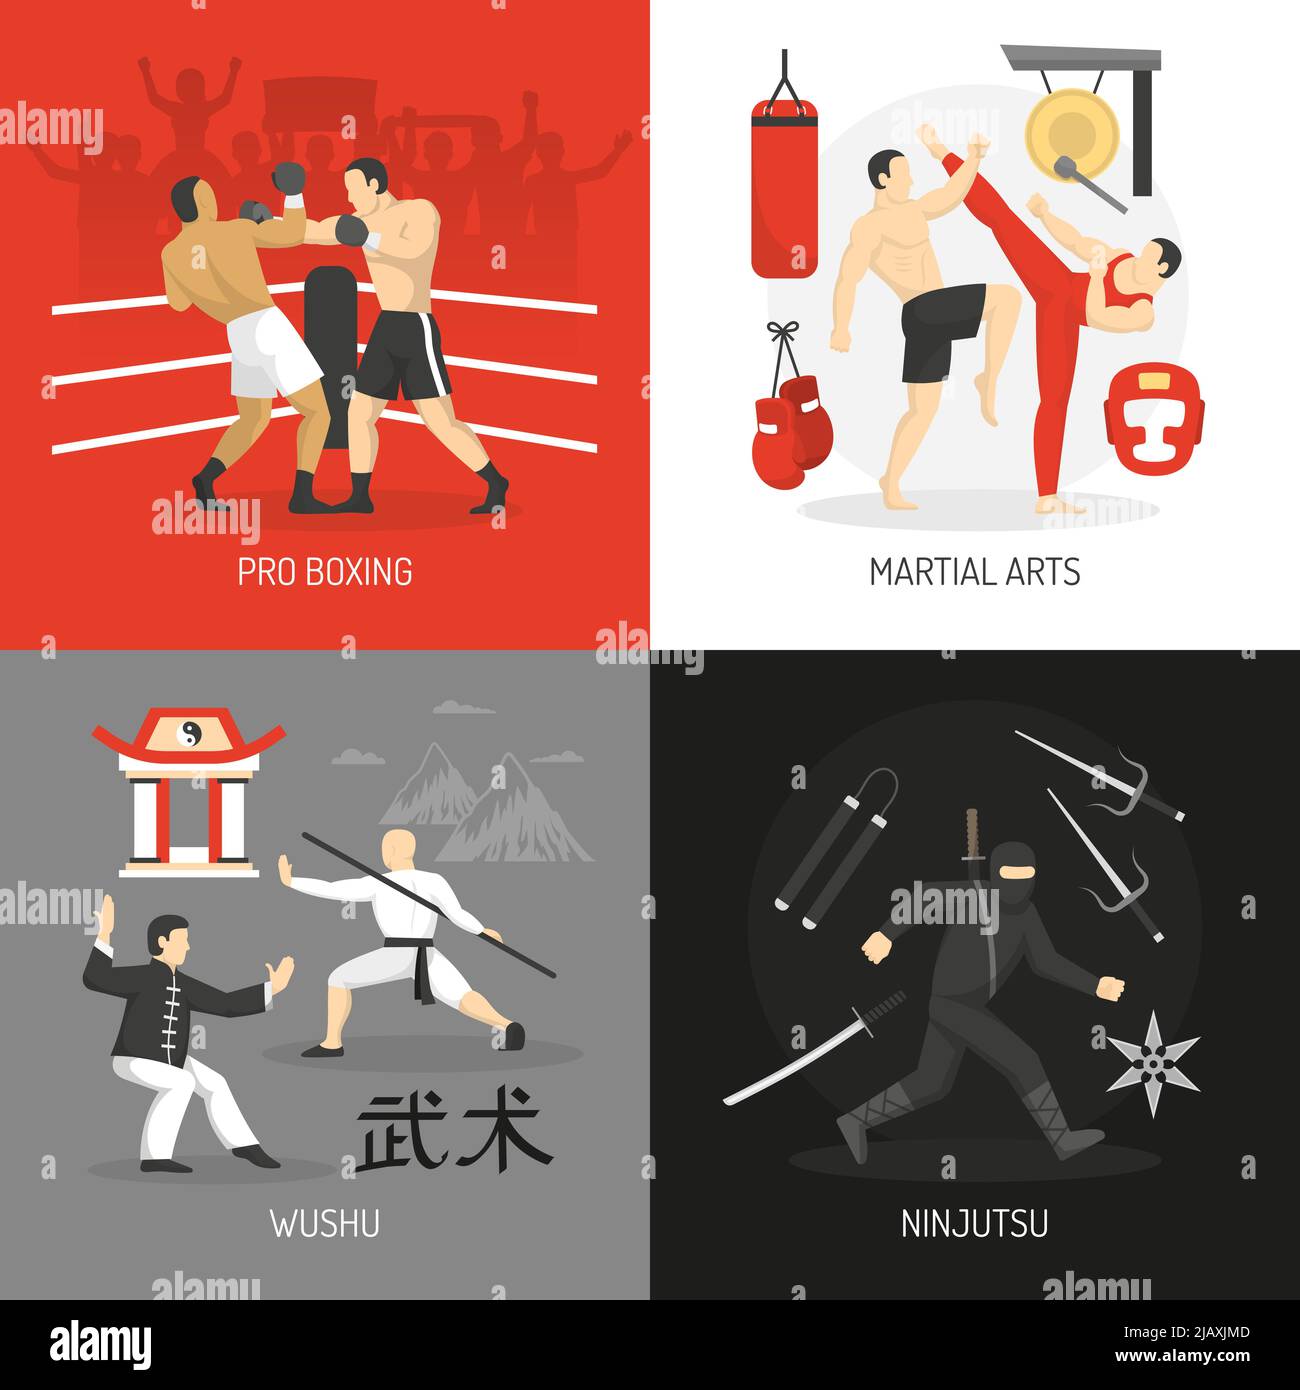 Martial arts concept with boxing chinese fighting school ninja and edged weapon training equipment isolated vector illustration Stock Vector